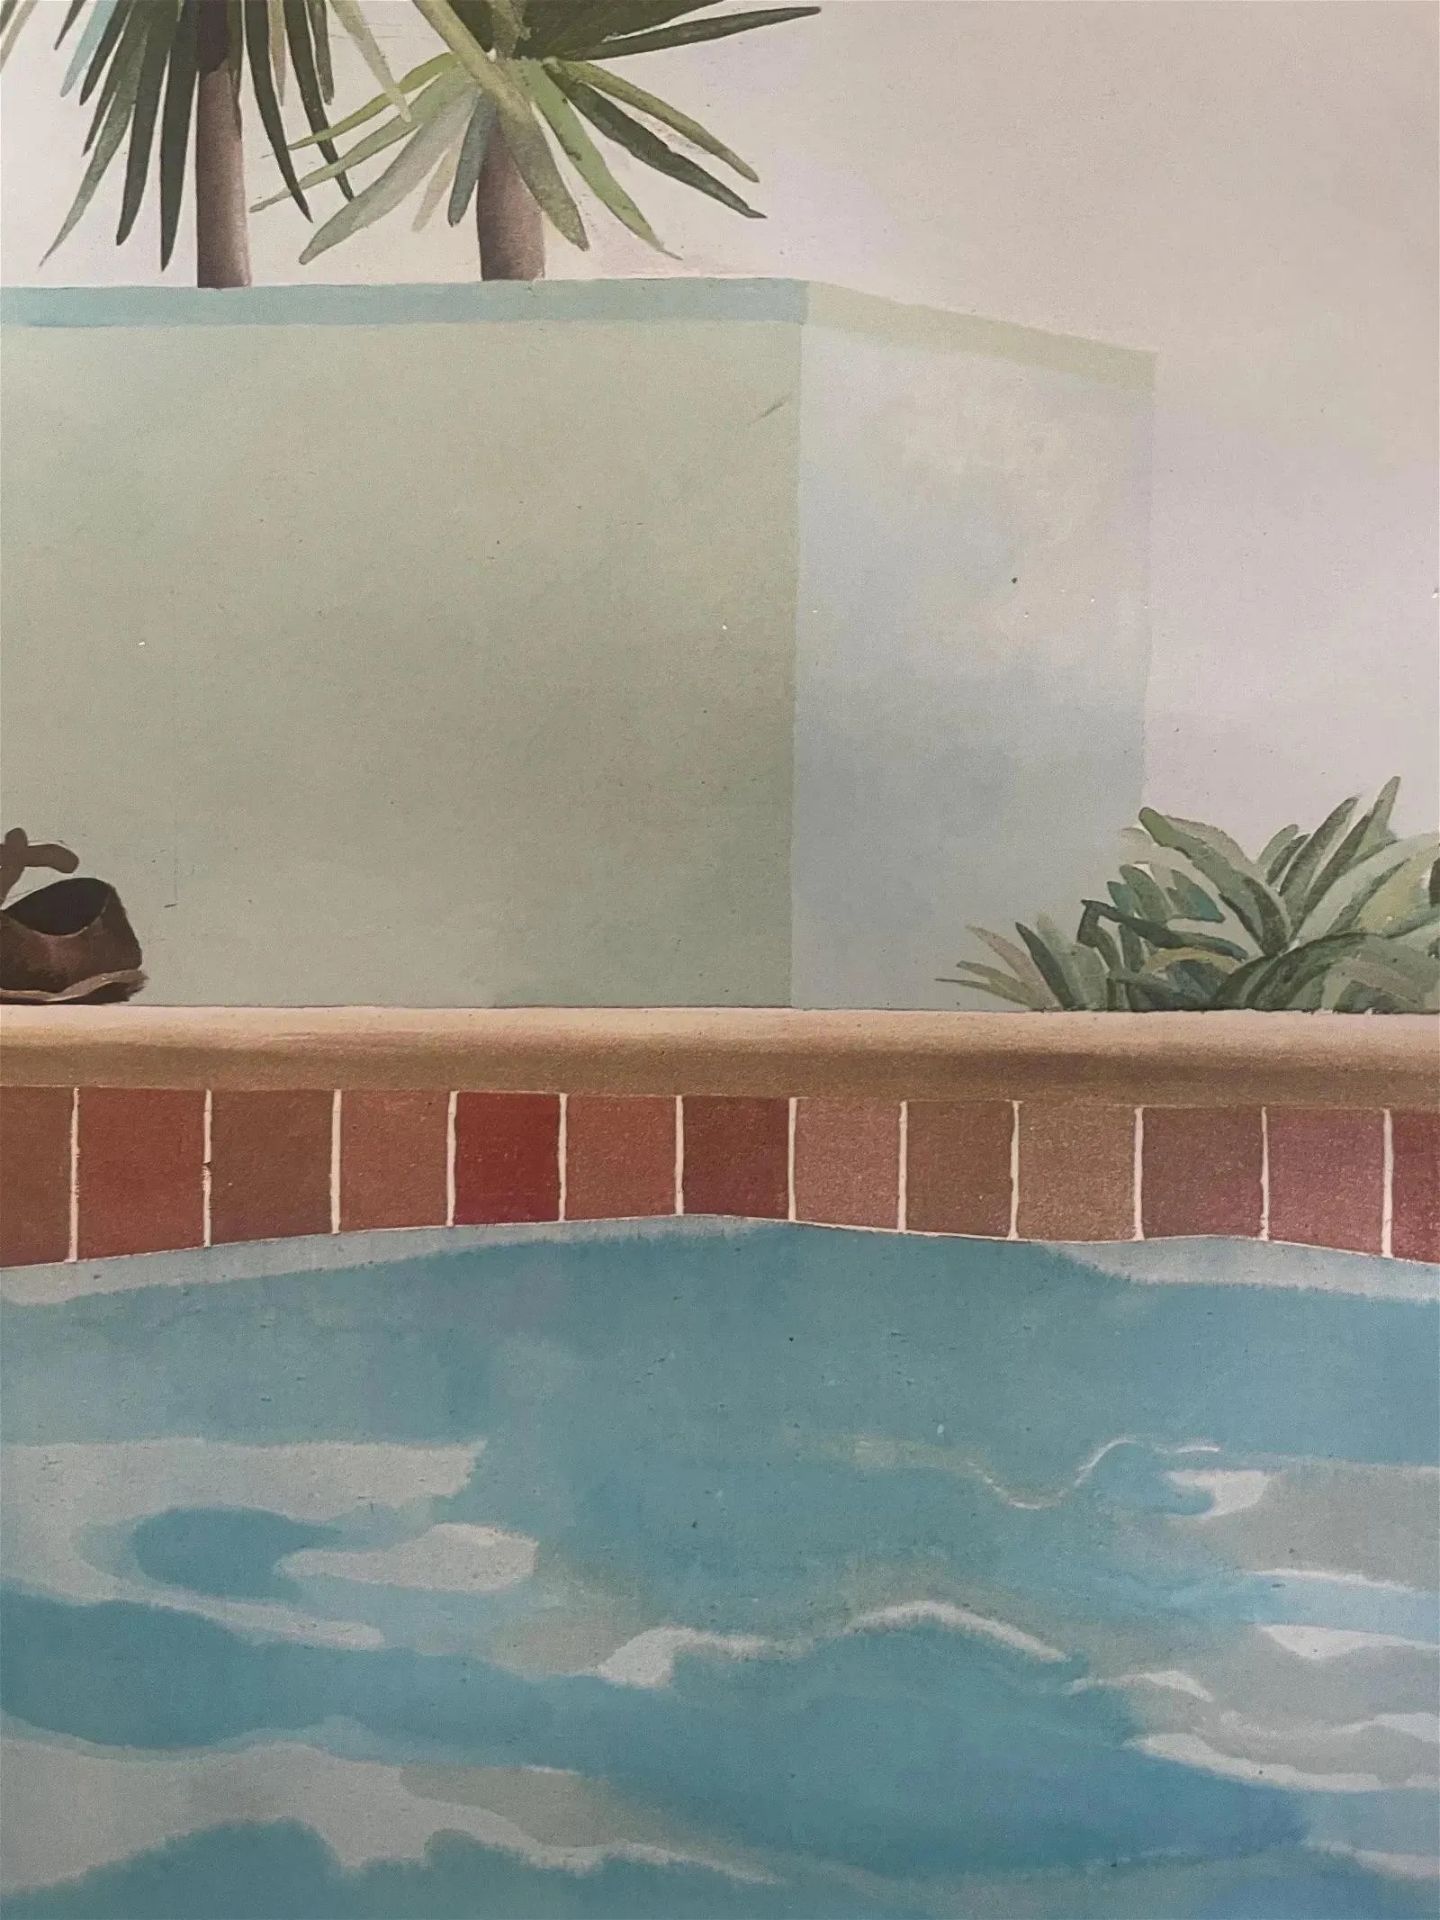 David Hockney "Pool and Steps, 1971" Offset Lithograph - Image 4 of 6